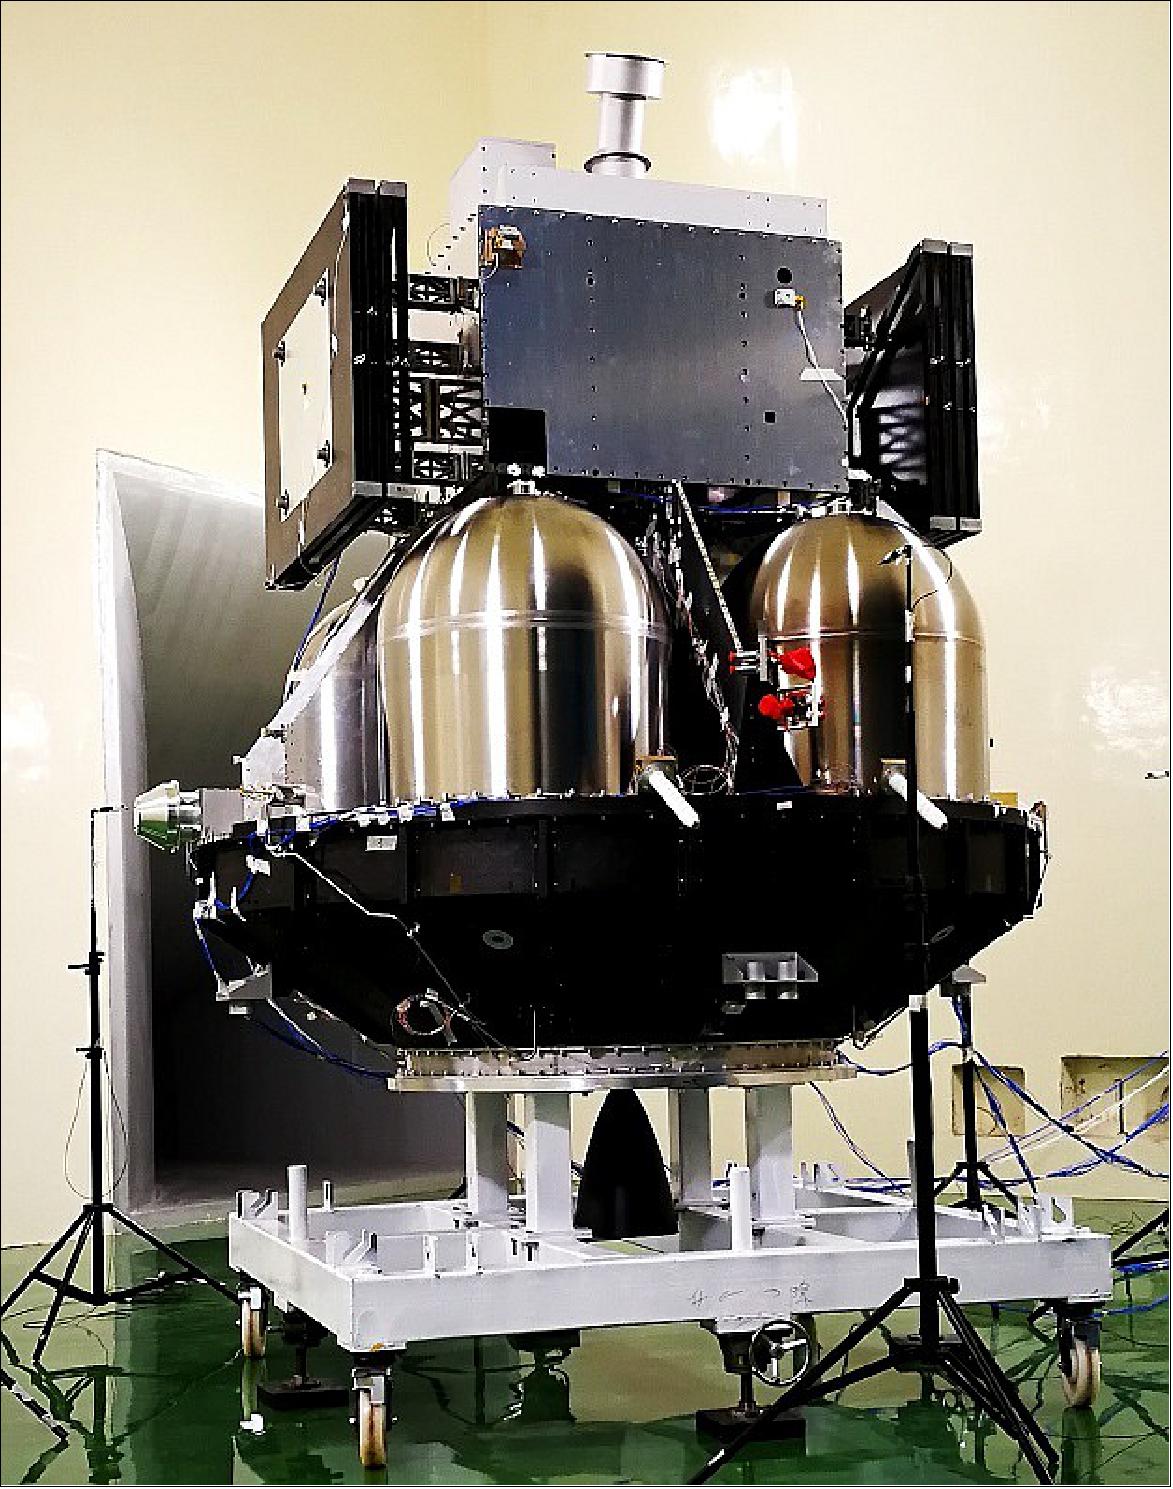 Figure 1: Structural model of the SMILE spacecraft at the Innovation Academy for Microsatellites (IAMC/CAS) in Shanghai, China. The spacecraft is being prepared for acoustic tests that will subject the spacecraft to sound waves of various frequencies, simulating the acoustic environment of a launch (image credit: IAMC/CAS) 4)